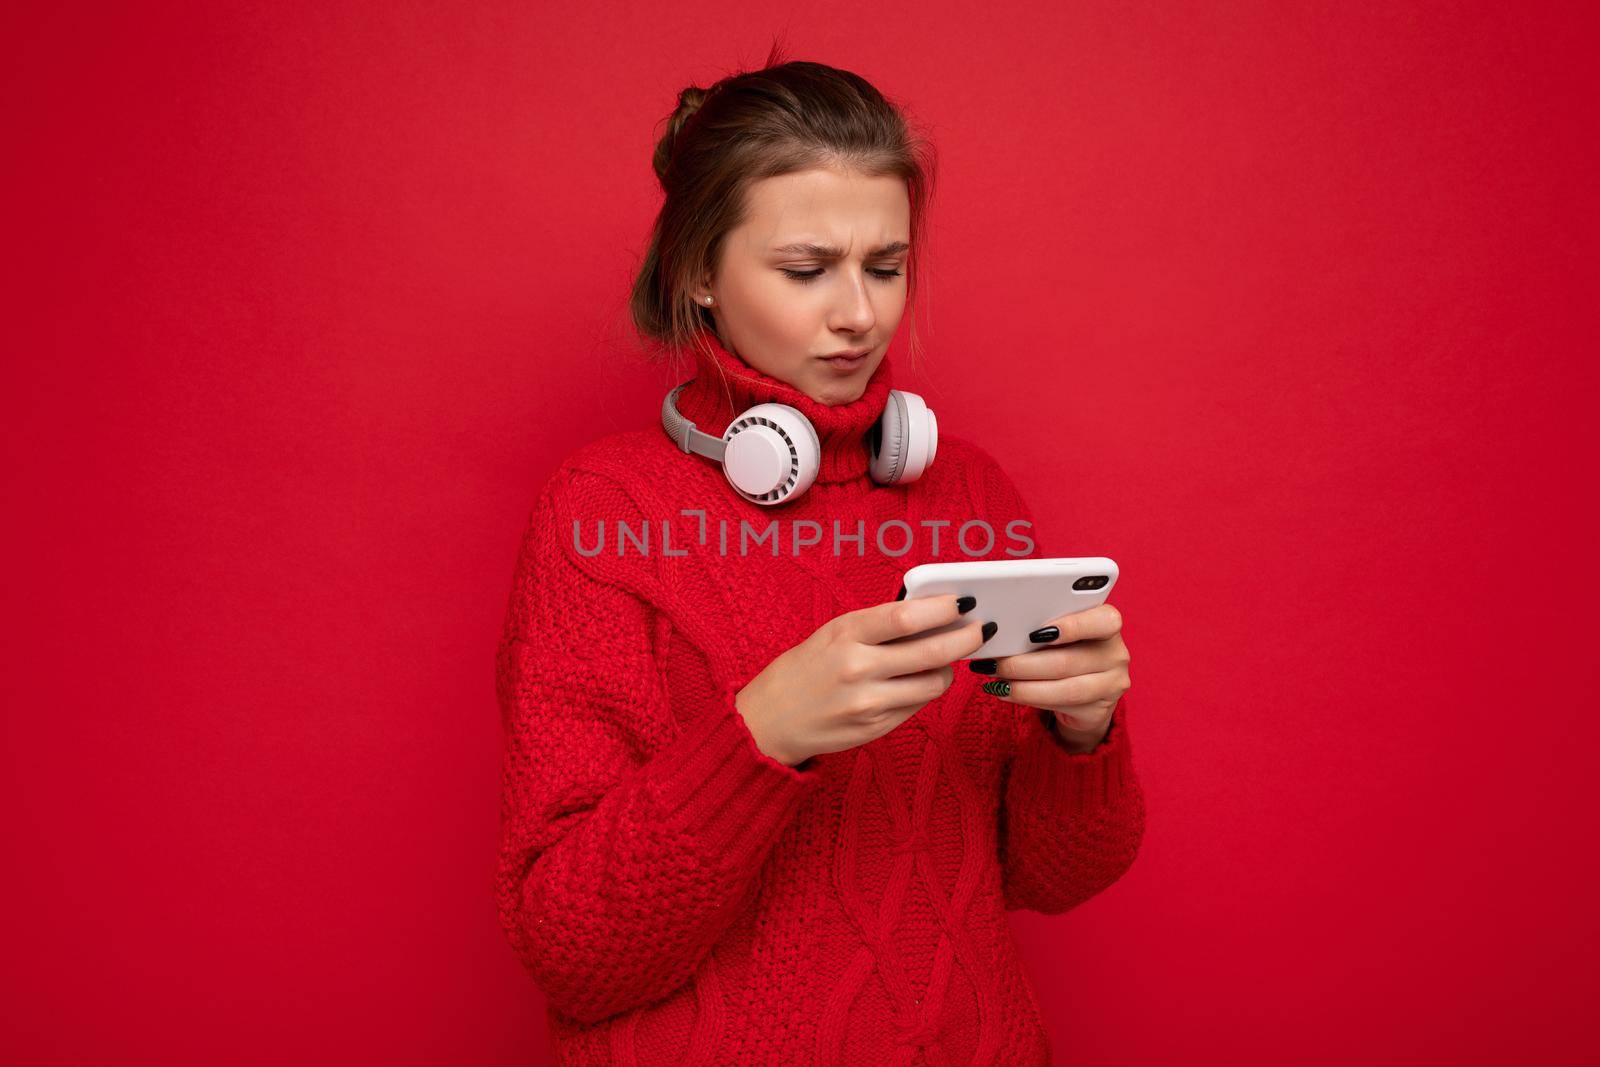 Attractive upset young brunet woman wearing red sweater isolated over red background wall holding and using mobile phone surfing on the internet and wearing bluetooth headphones looking at gadjet.